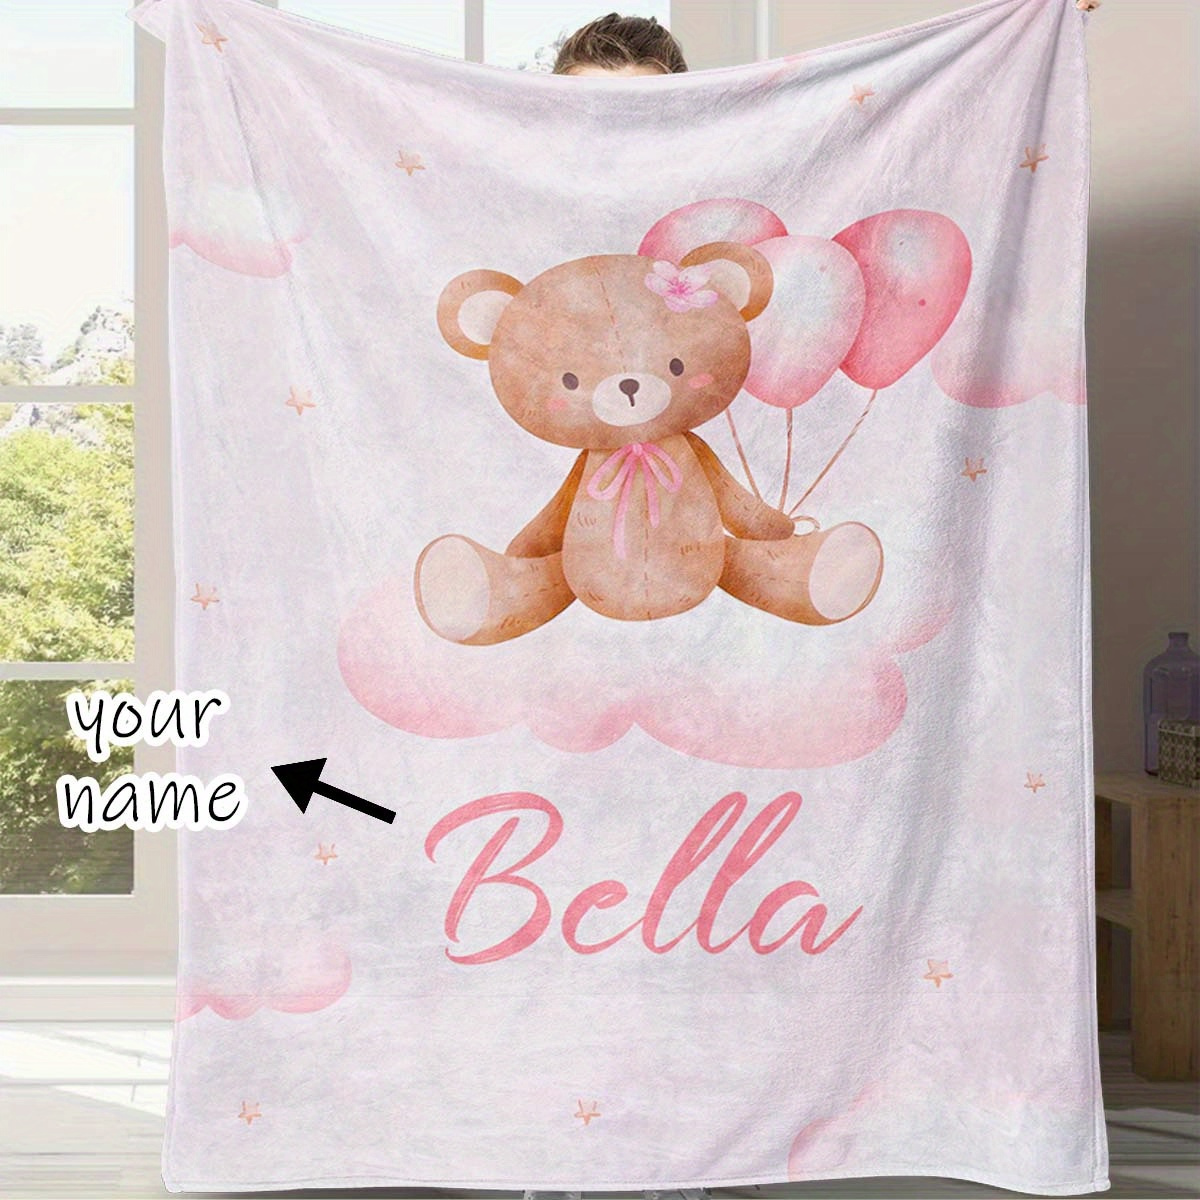 

Custom Dreamy Gradient Pink Cloud & Teddy Bear Balloon Blanket - Personalized Name, Soft Flannel For All Seasons, Perfect Birthday Or Holiday Gift